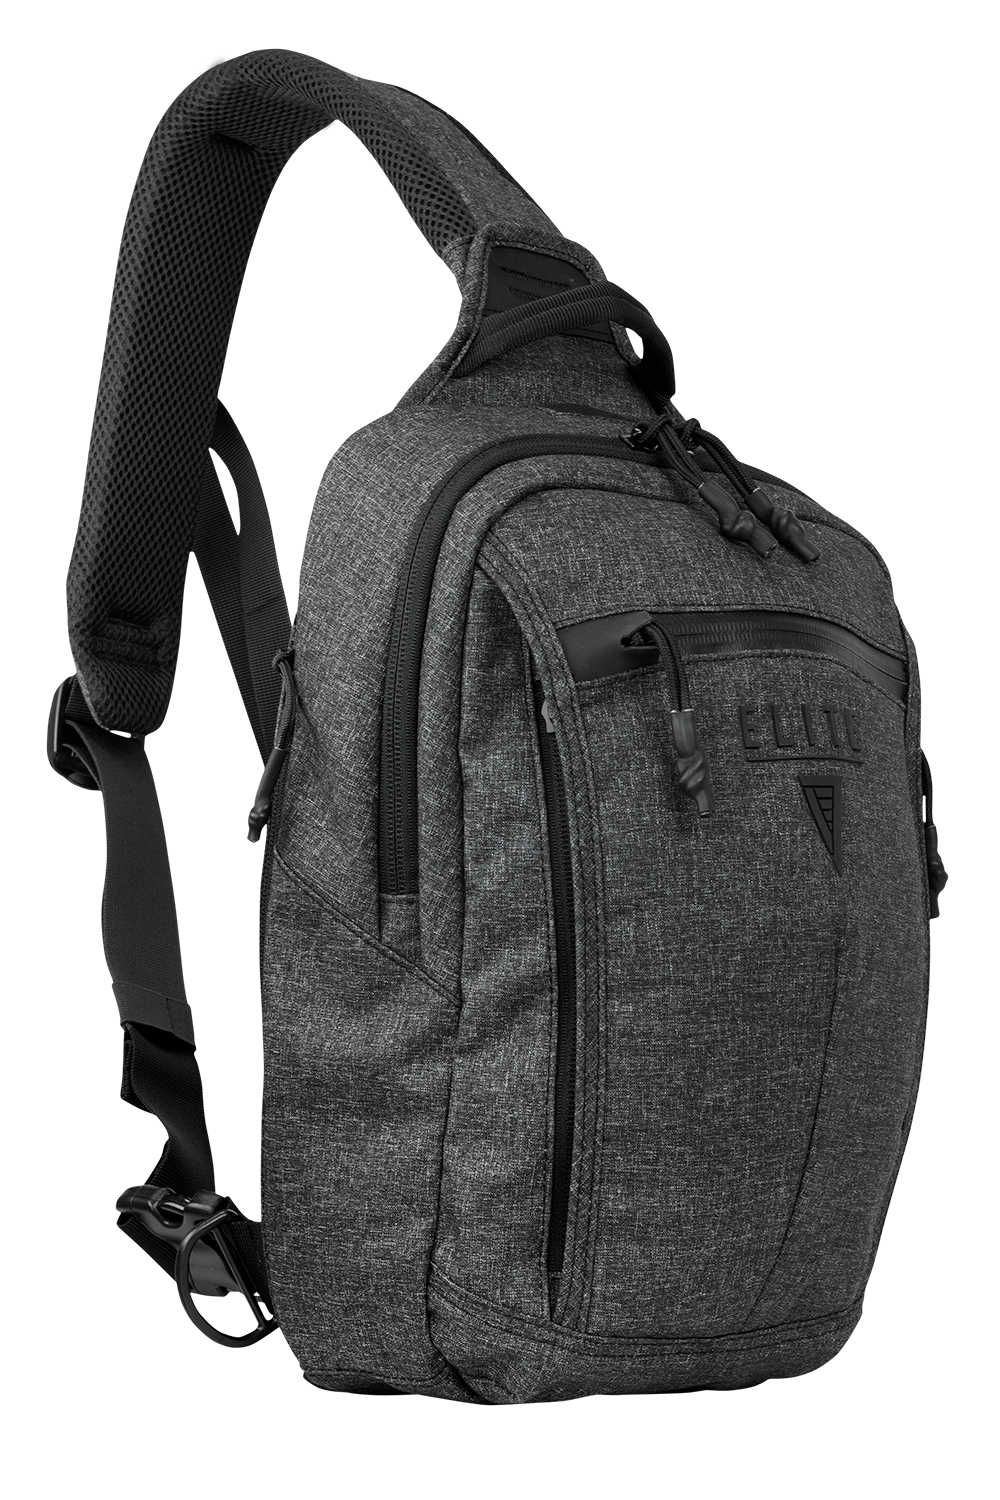 Elite Survival Systems Summit Discreet Rifle Backpack Review » Concealed  Carry Inc